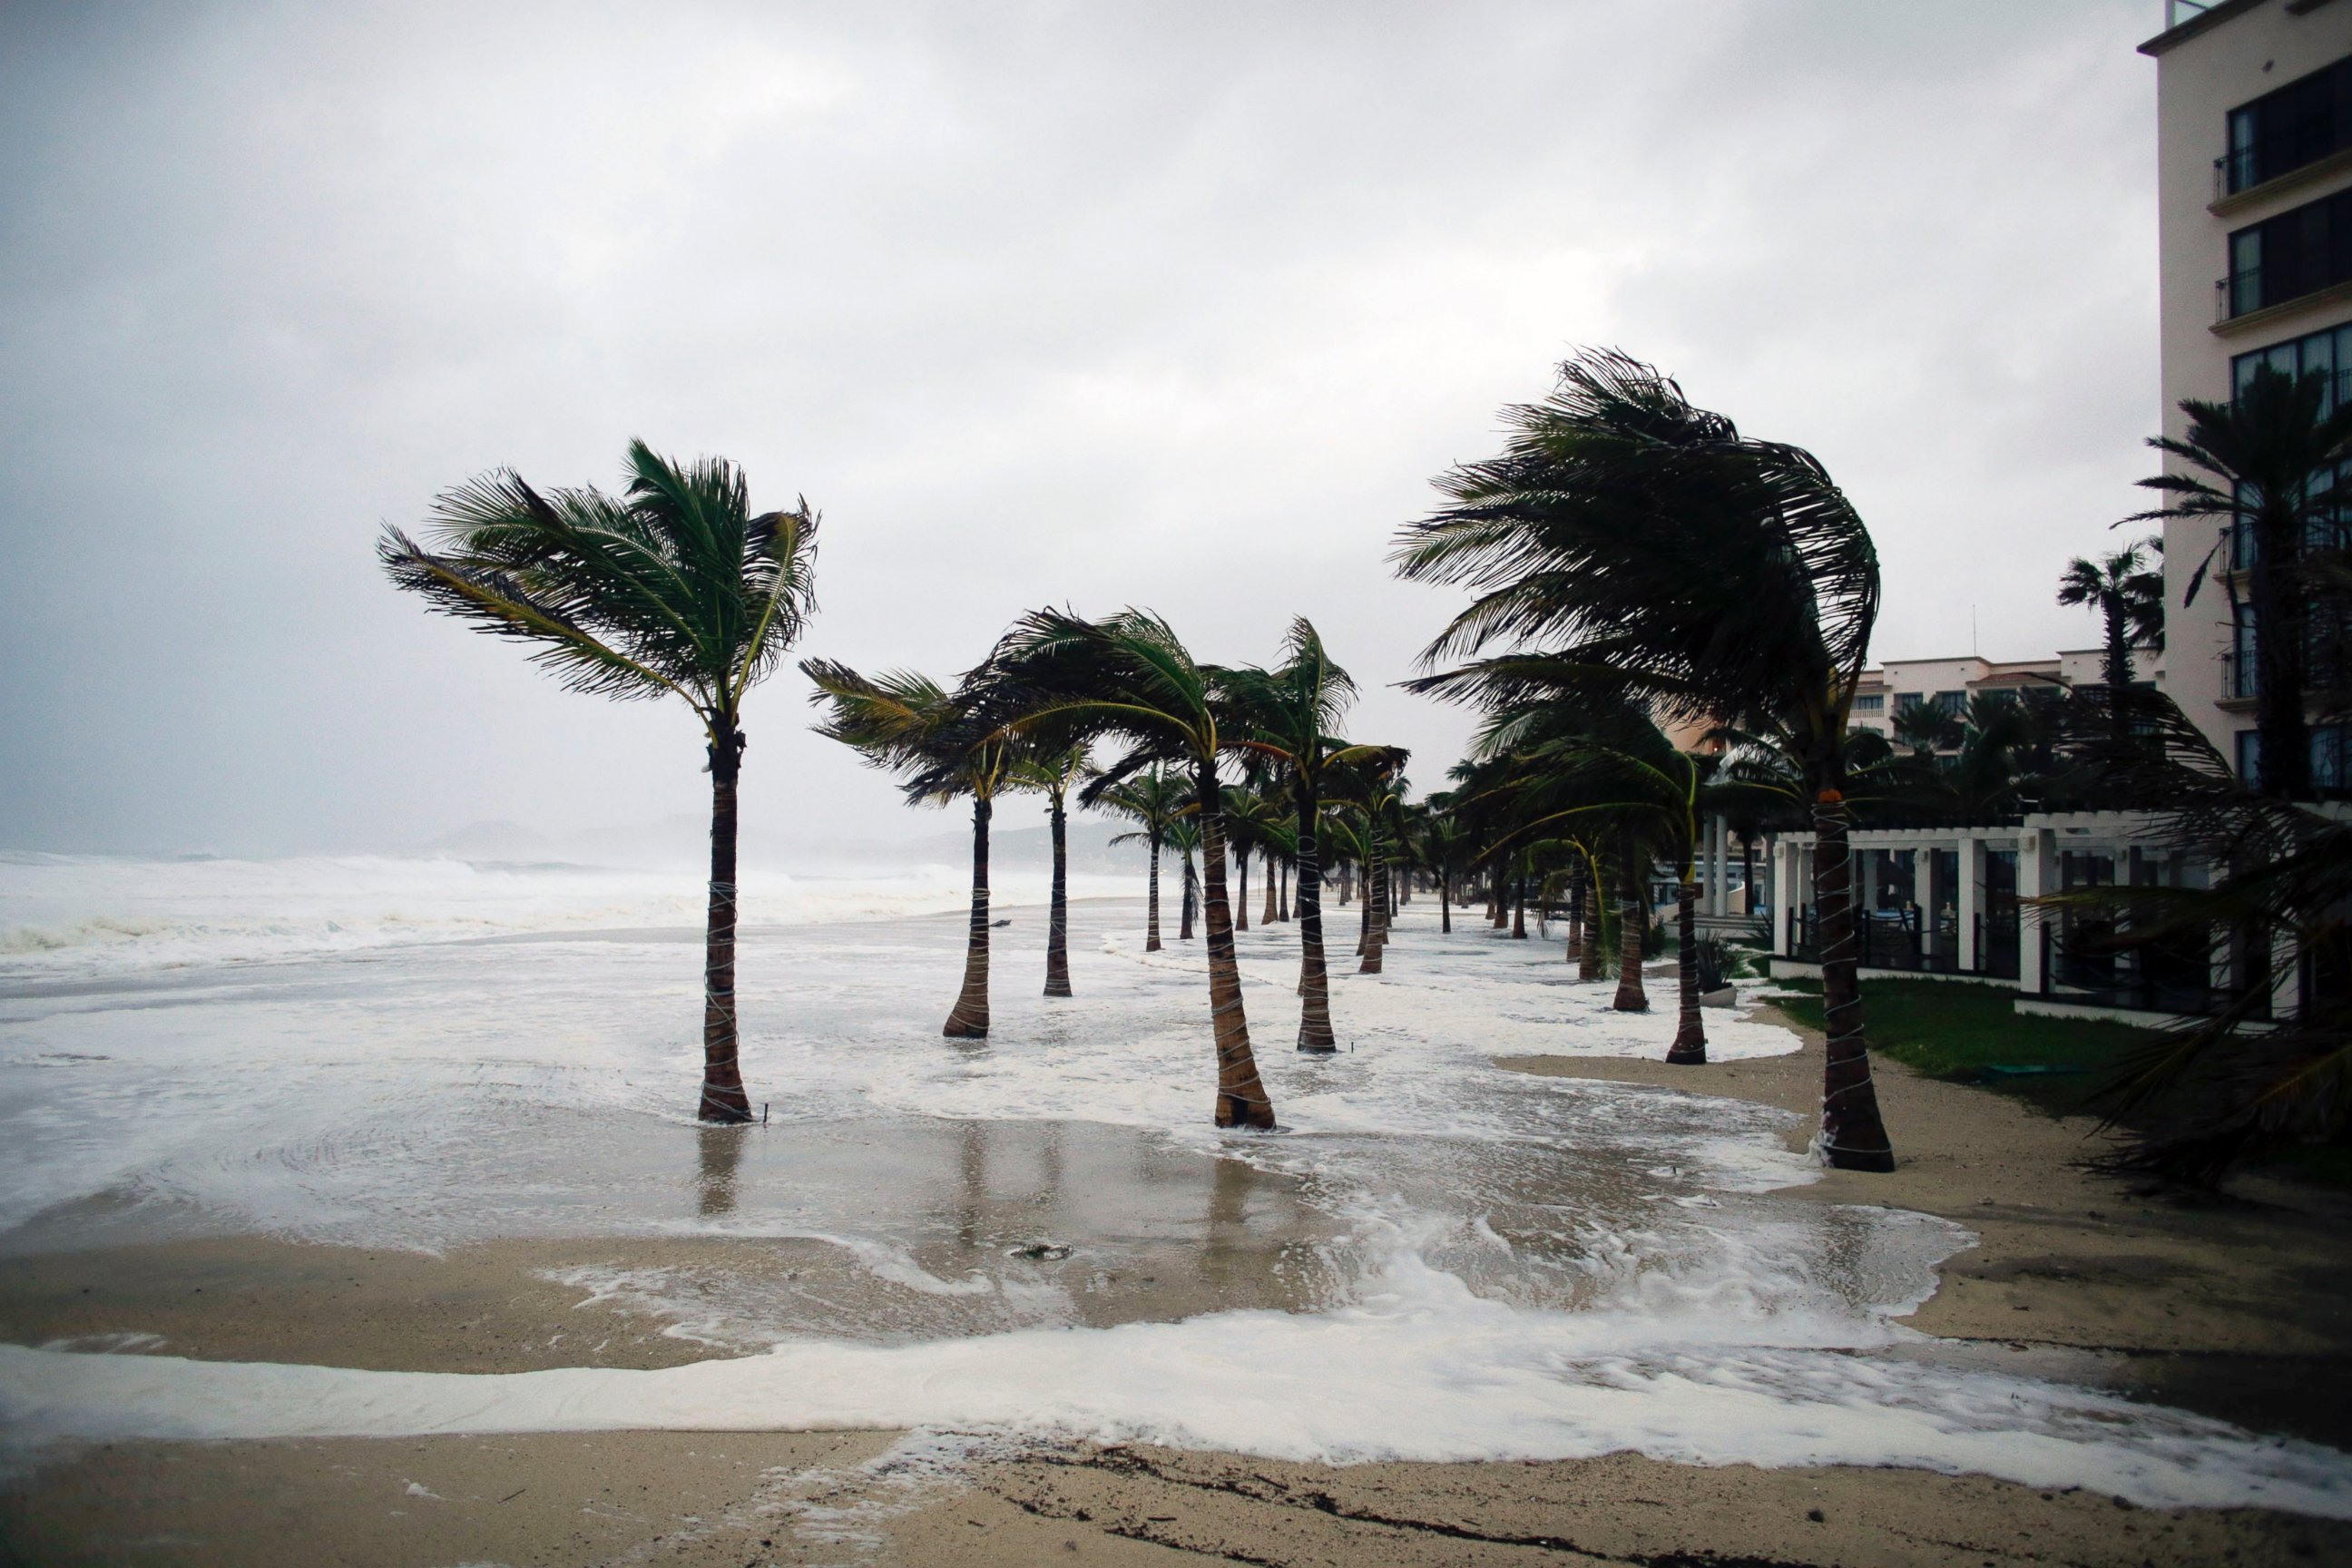 PHOTO: Winds blow palm trees on the beach in Los Cabos, Mexico, Sept. 14, 2014.